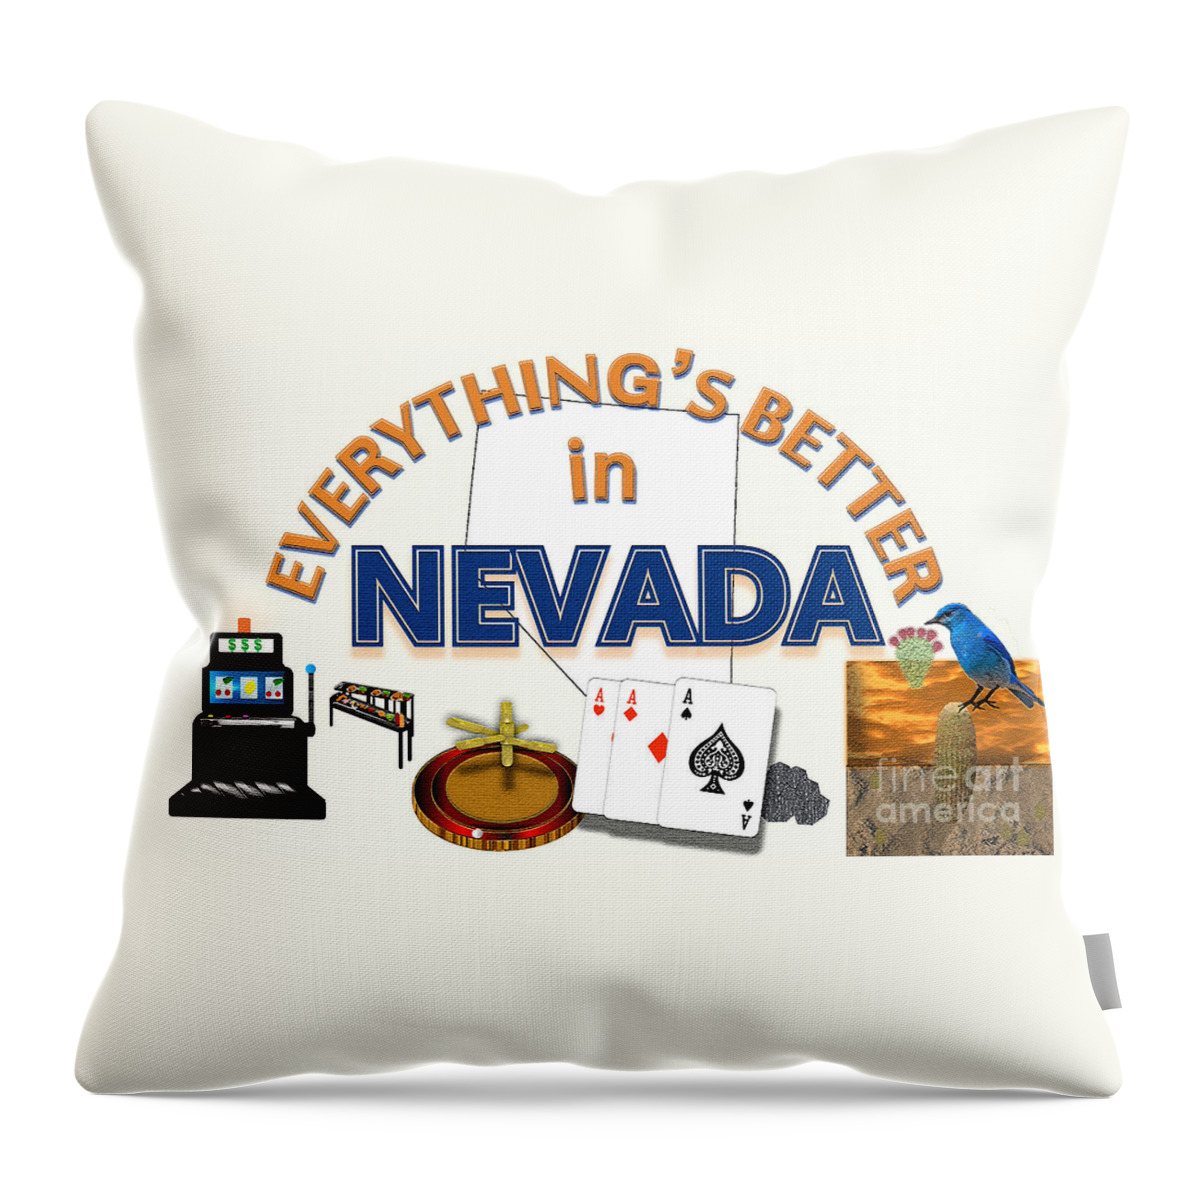 Nevada Throw Pillow featuring the digital art Everything's Better in Nevada by Pharris Art